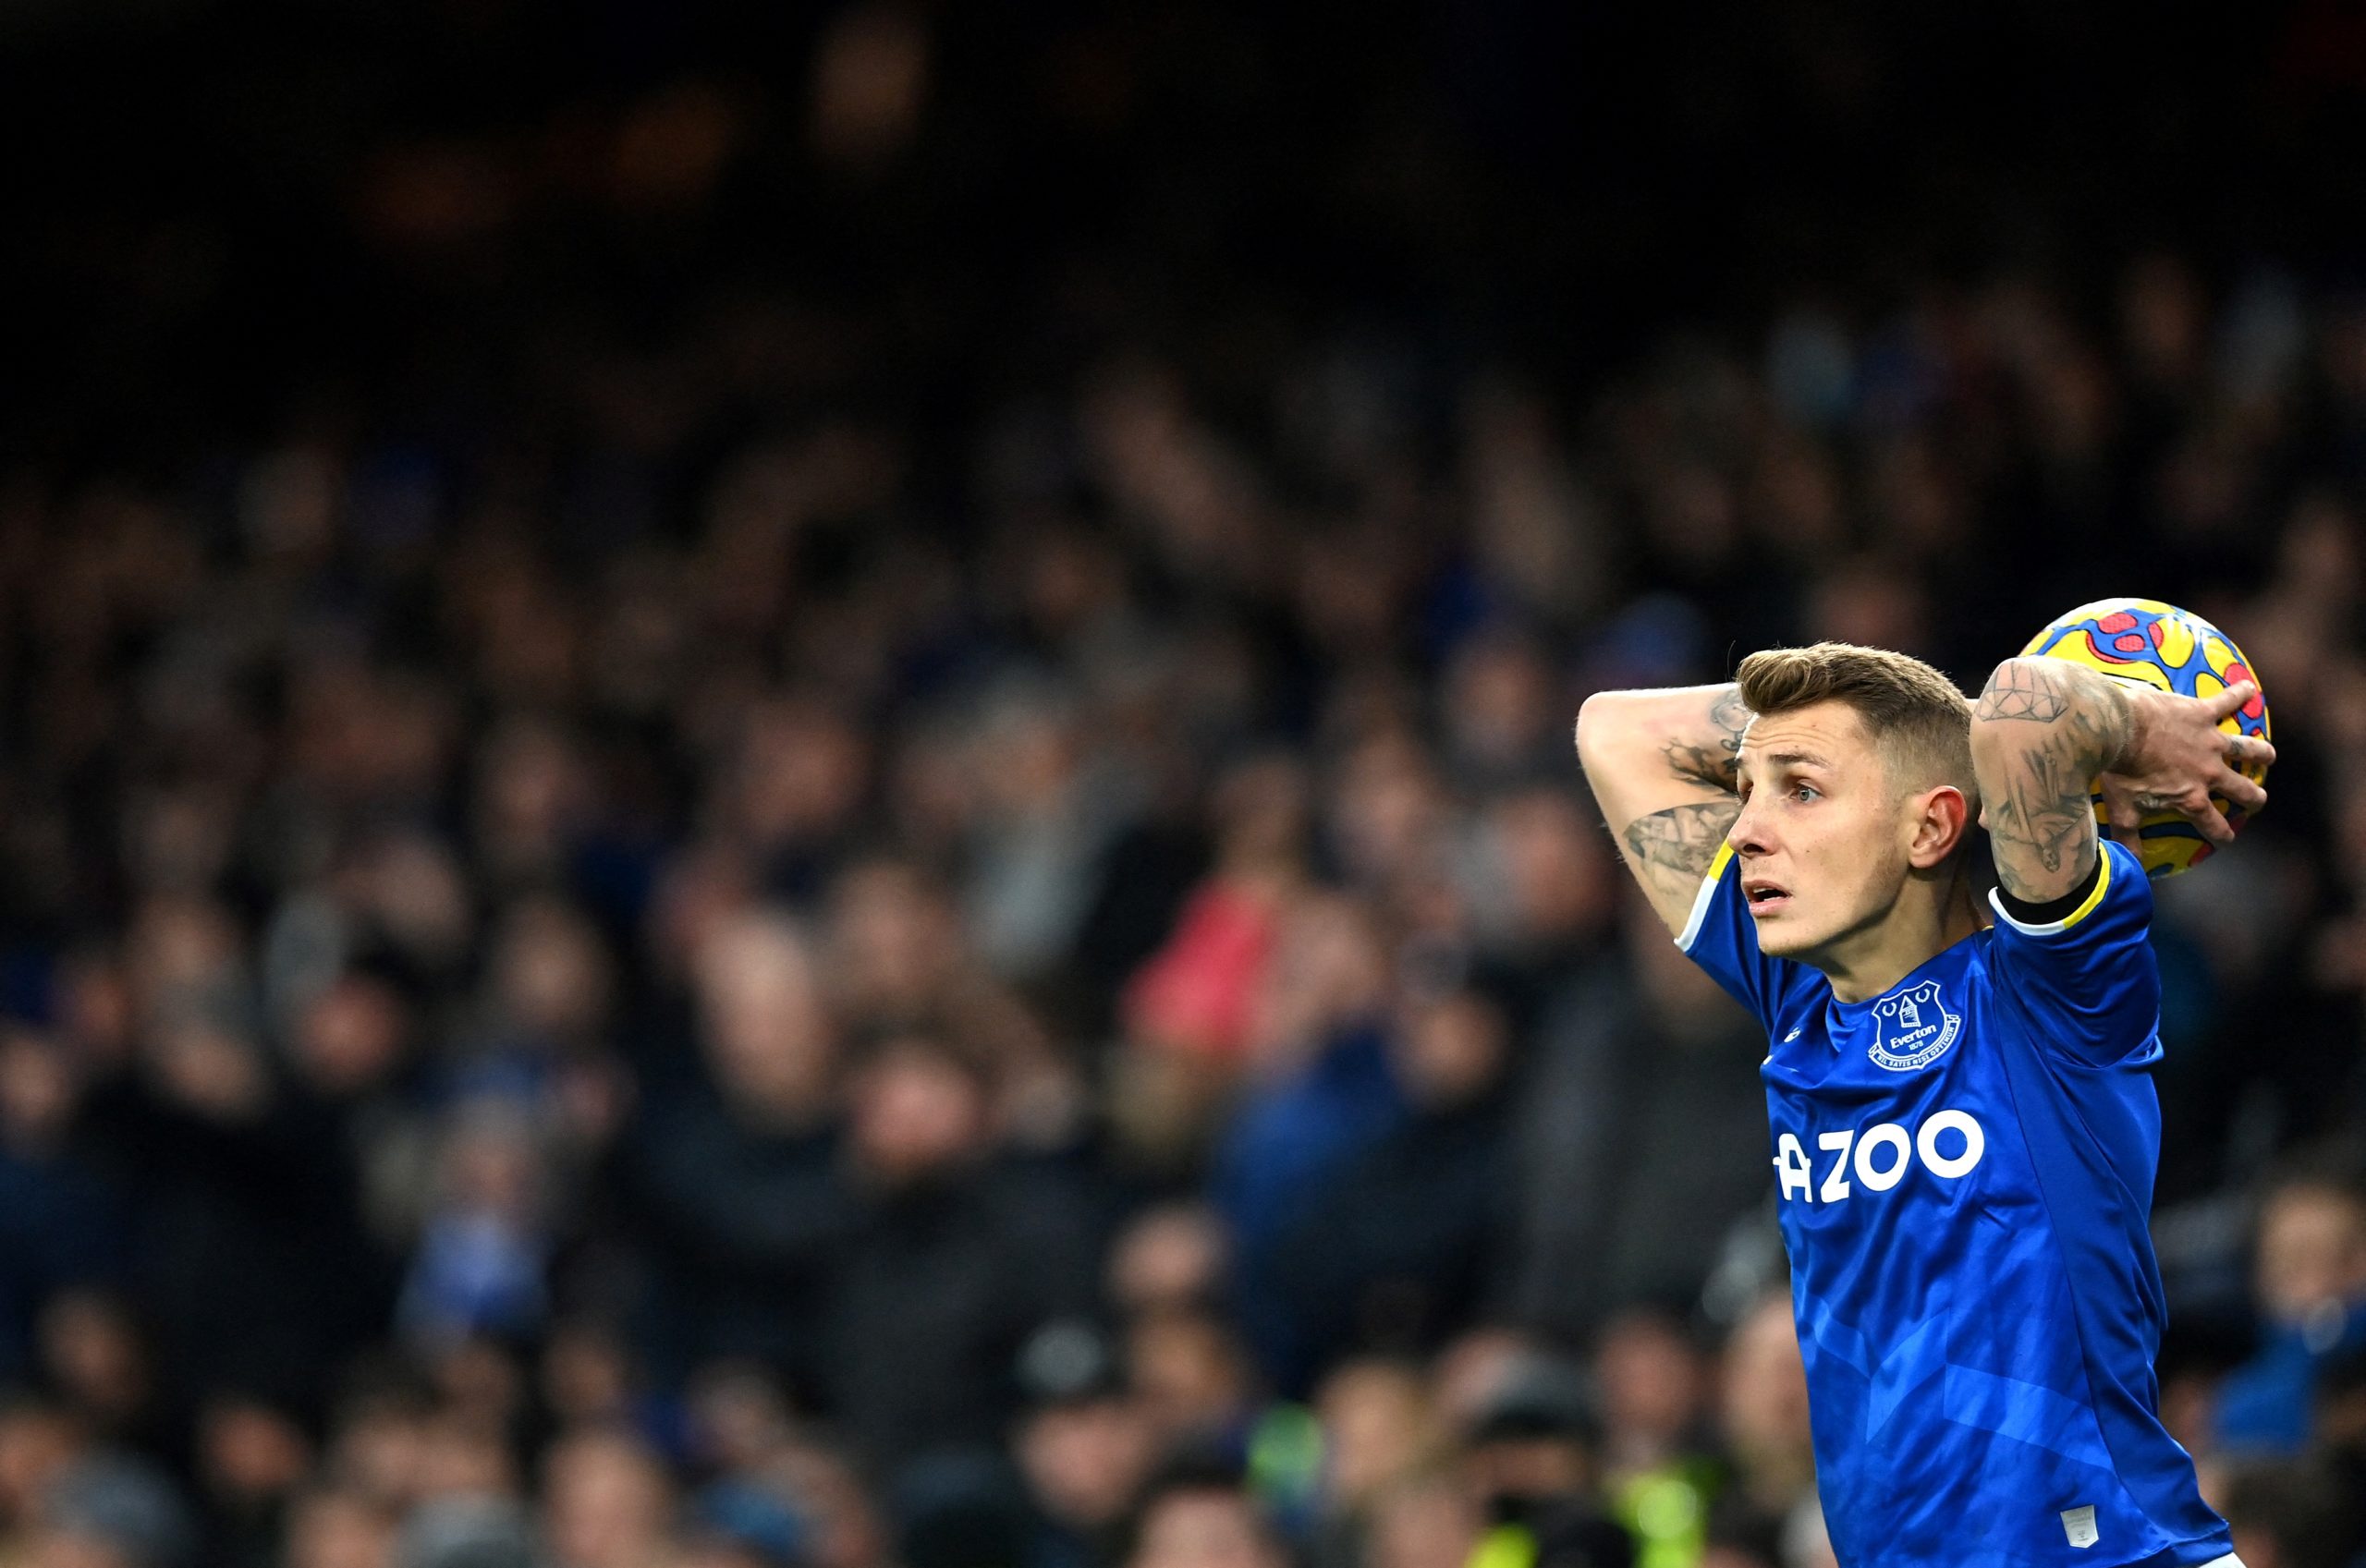 West Ham and Chelsea both want January transfer window deals for Lucas Digne